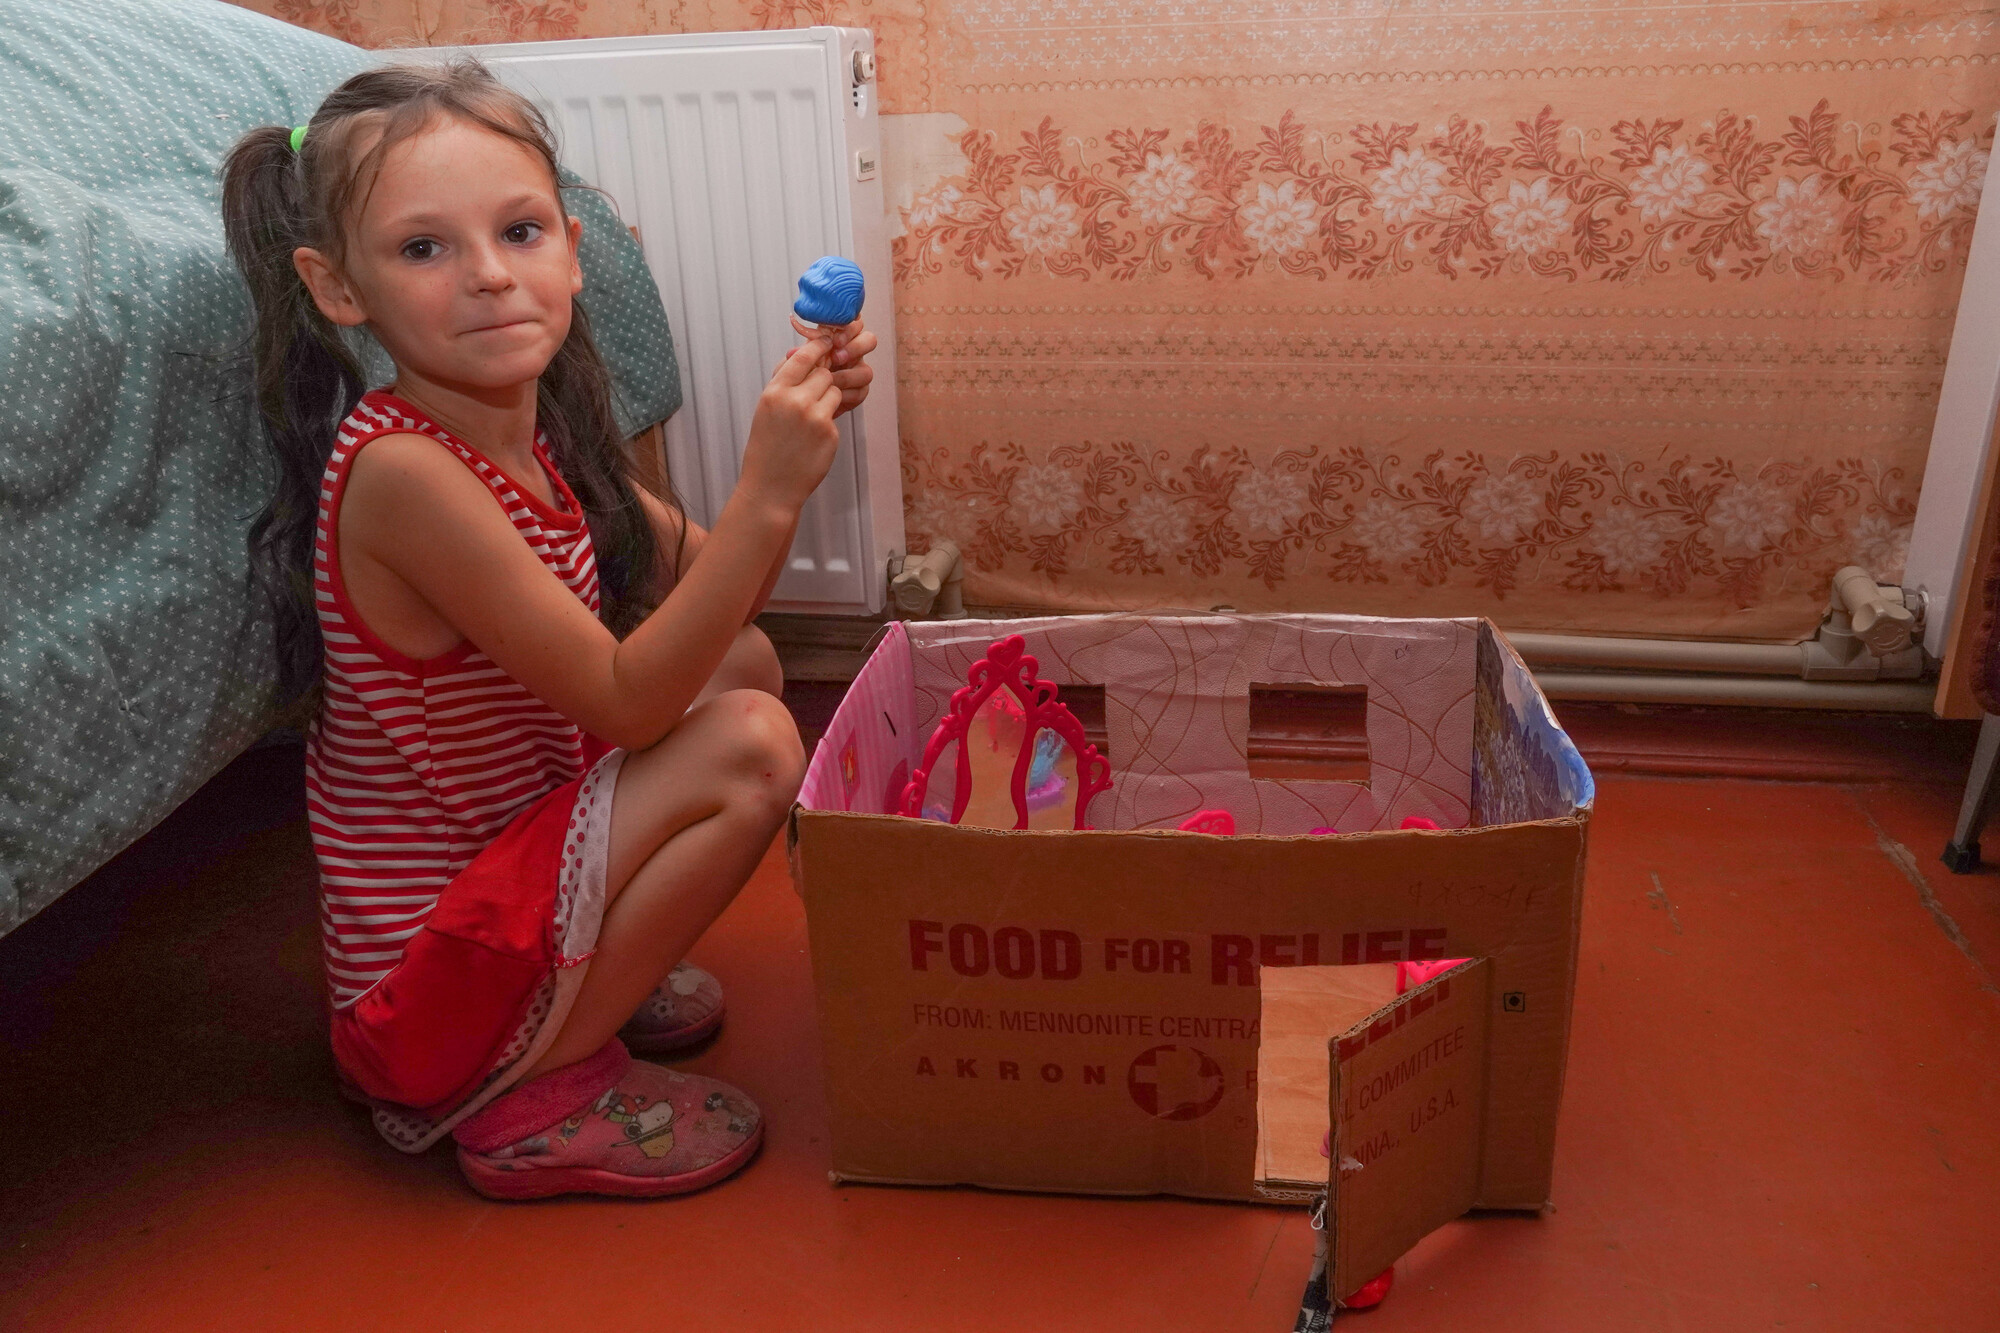 A young girl playing with a doll beside a dollhouse made of an MCC canned meat box